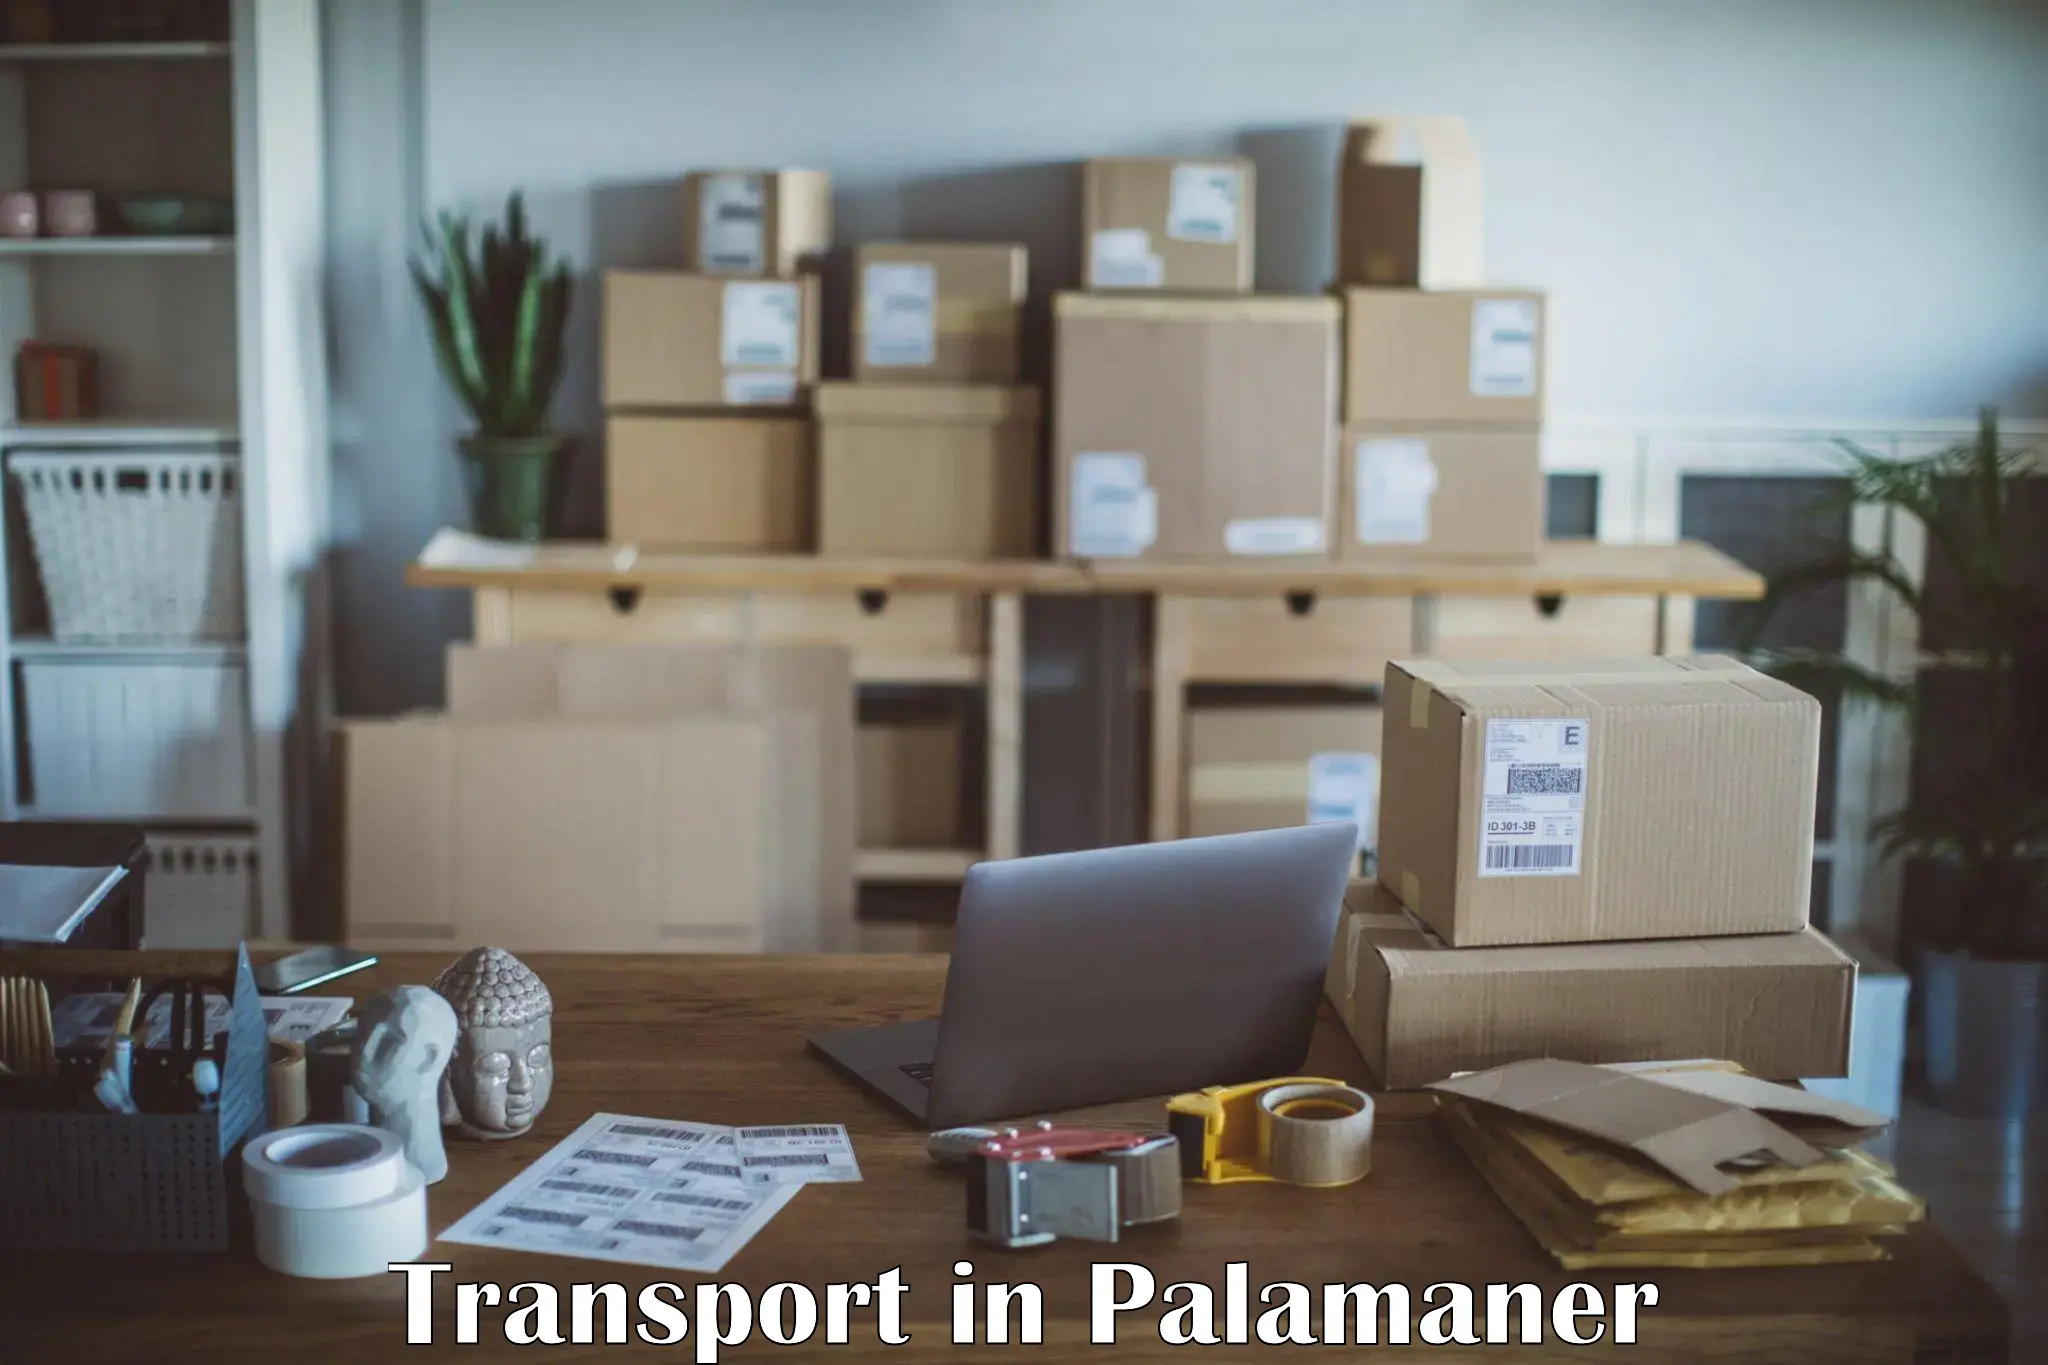 Daily transport service in Palamaner